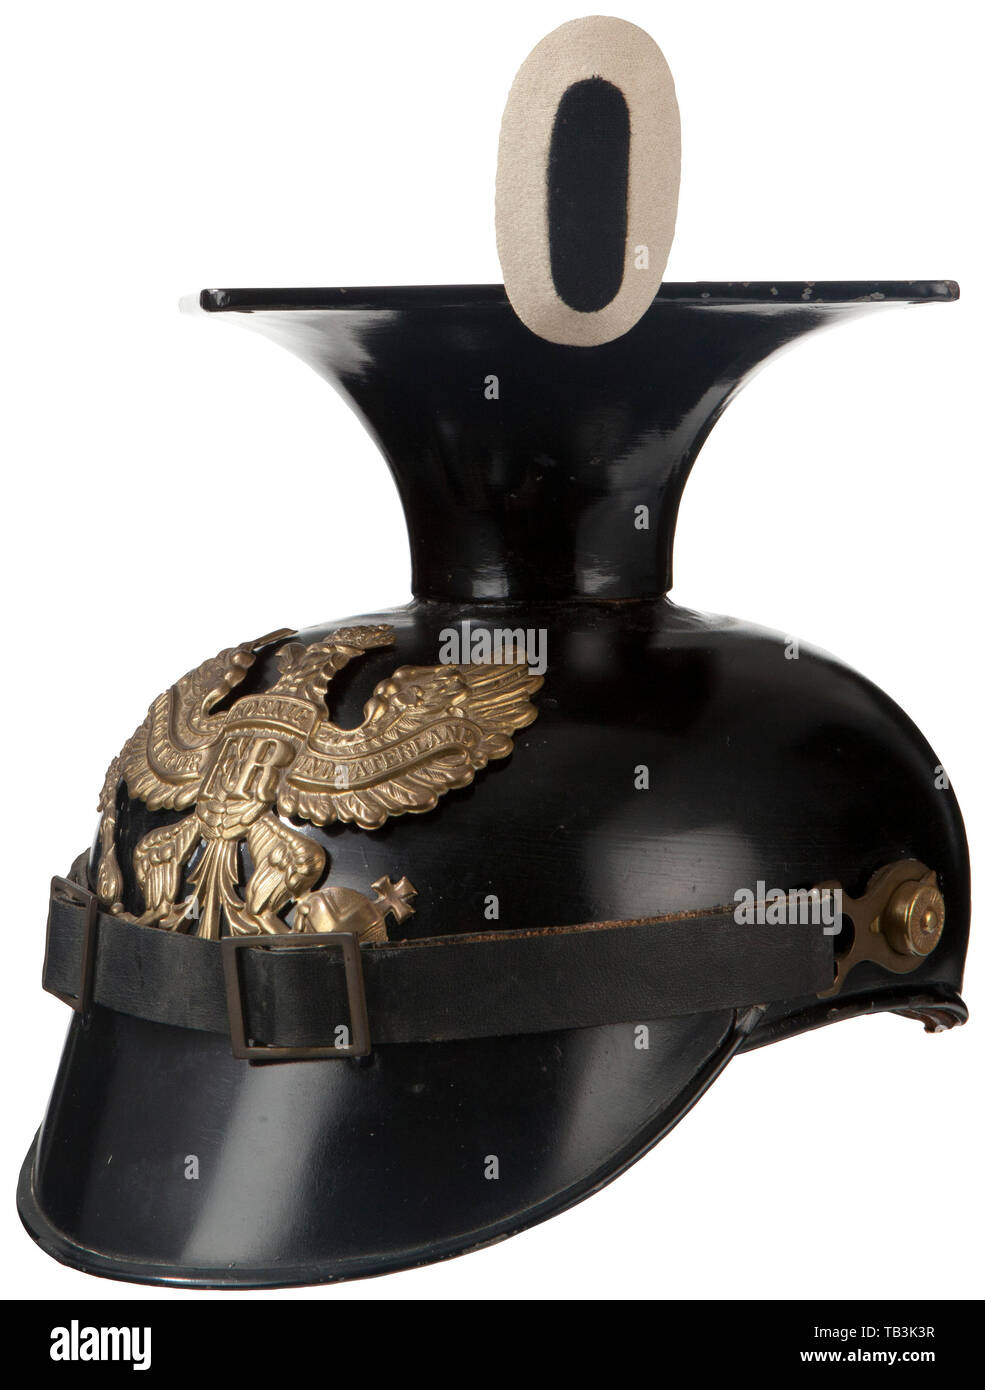 A wartime all metal enlisted Prussian Uhlan czapka, Black painted metal body and visor, possibly portions of helmet body are repainted, gold Prussian eagle front plate attached by loops with leather inserts, replacement black leather chinstrap with brass buckles attached by M 91 lug side posts, black and white EM field badge, national colours EM cockade, worn black leather liner. USA-lot. 20th century, 1910s, First World War / WWI, world war, world wars, historic, historical, Additional-Rights-Clearance-Info-Not-Available Stock Photo